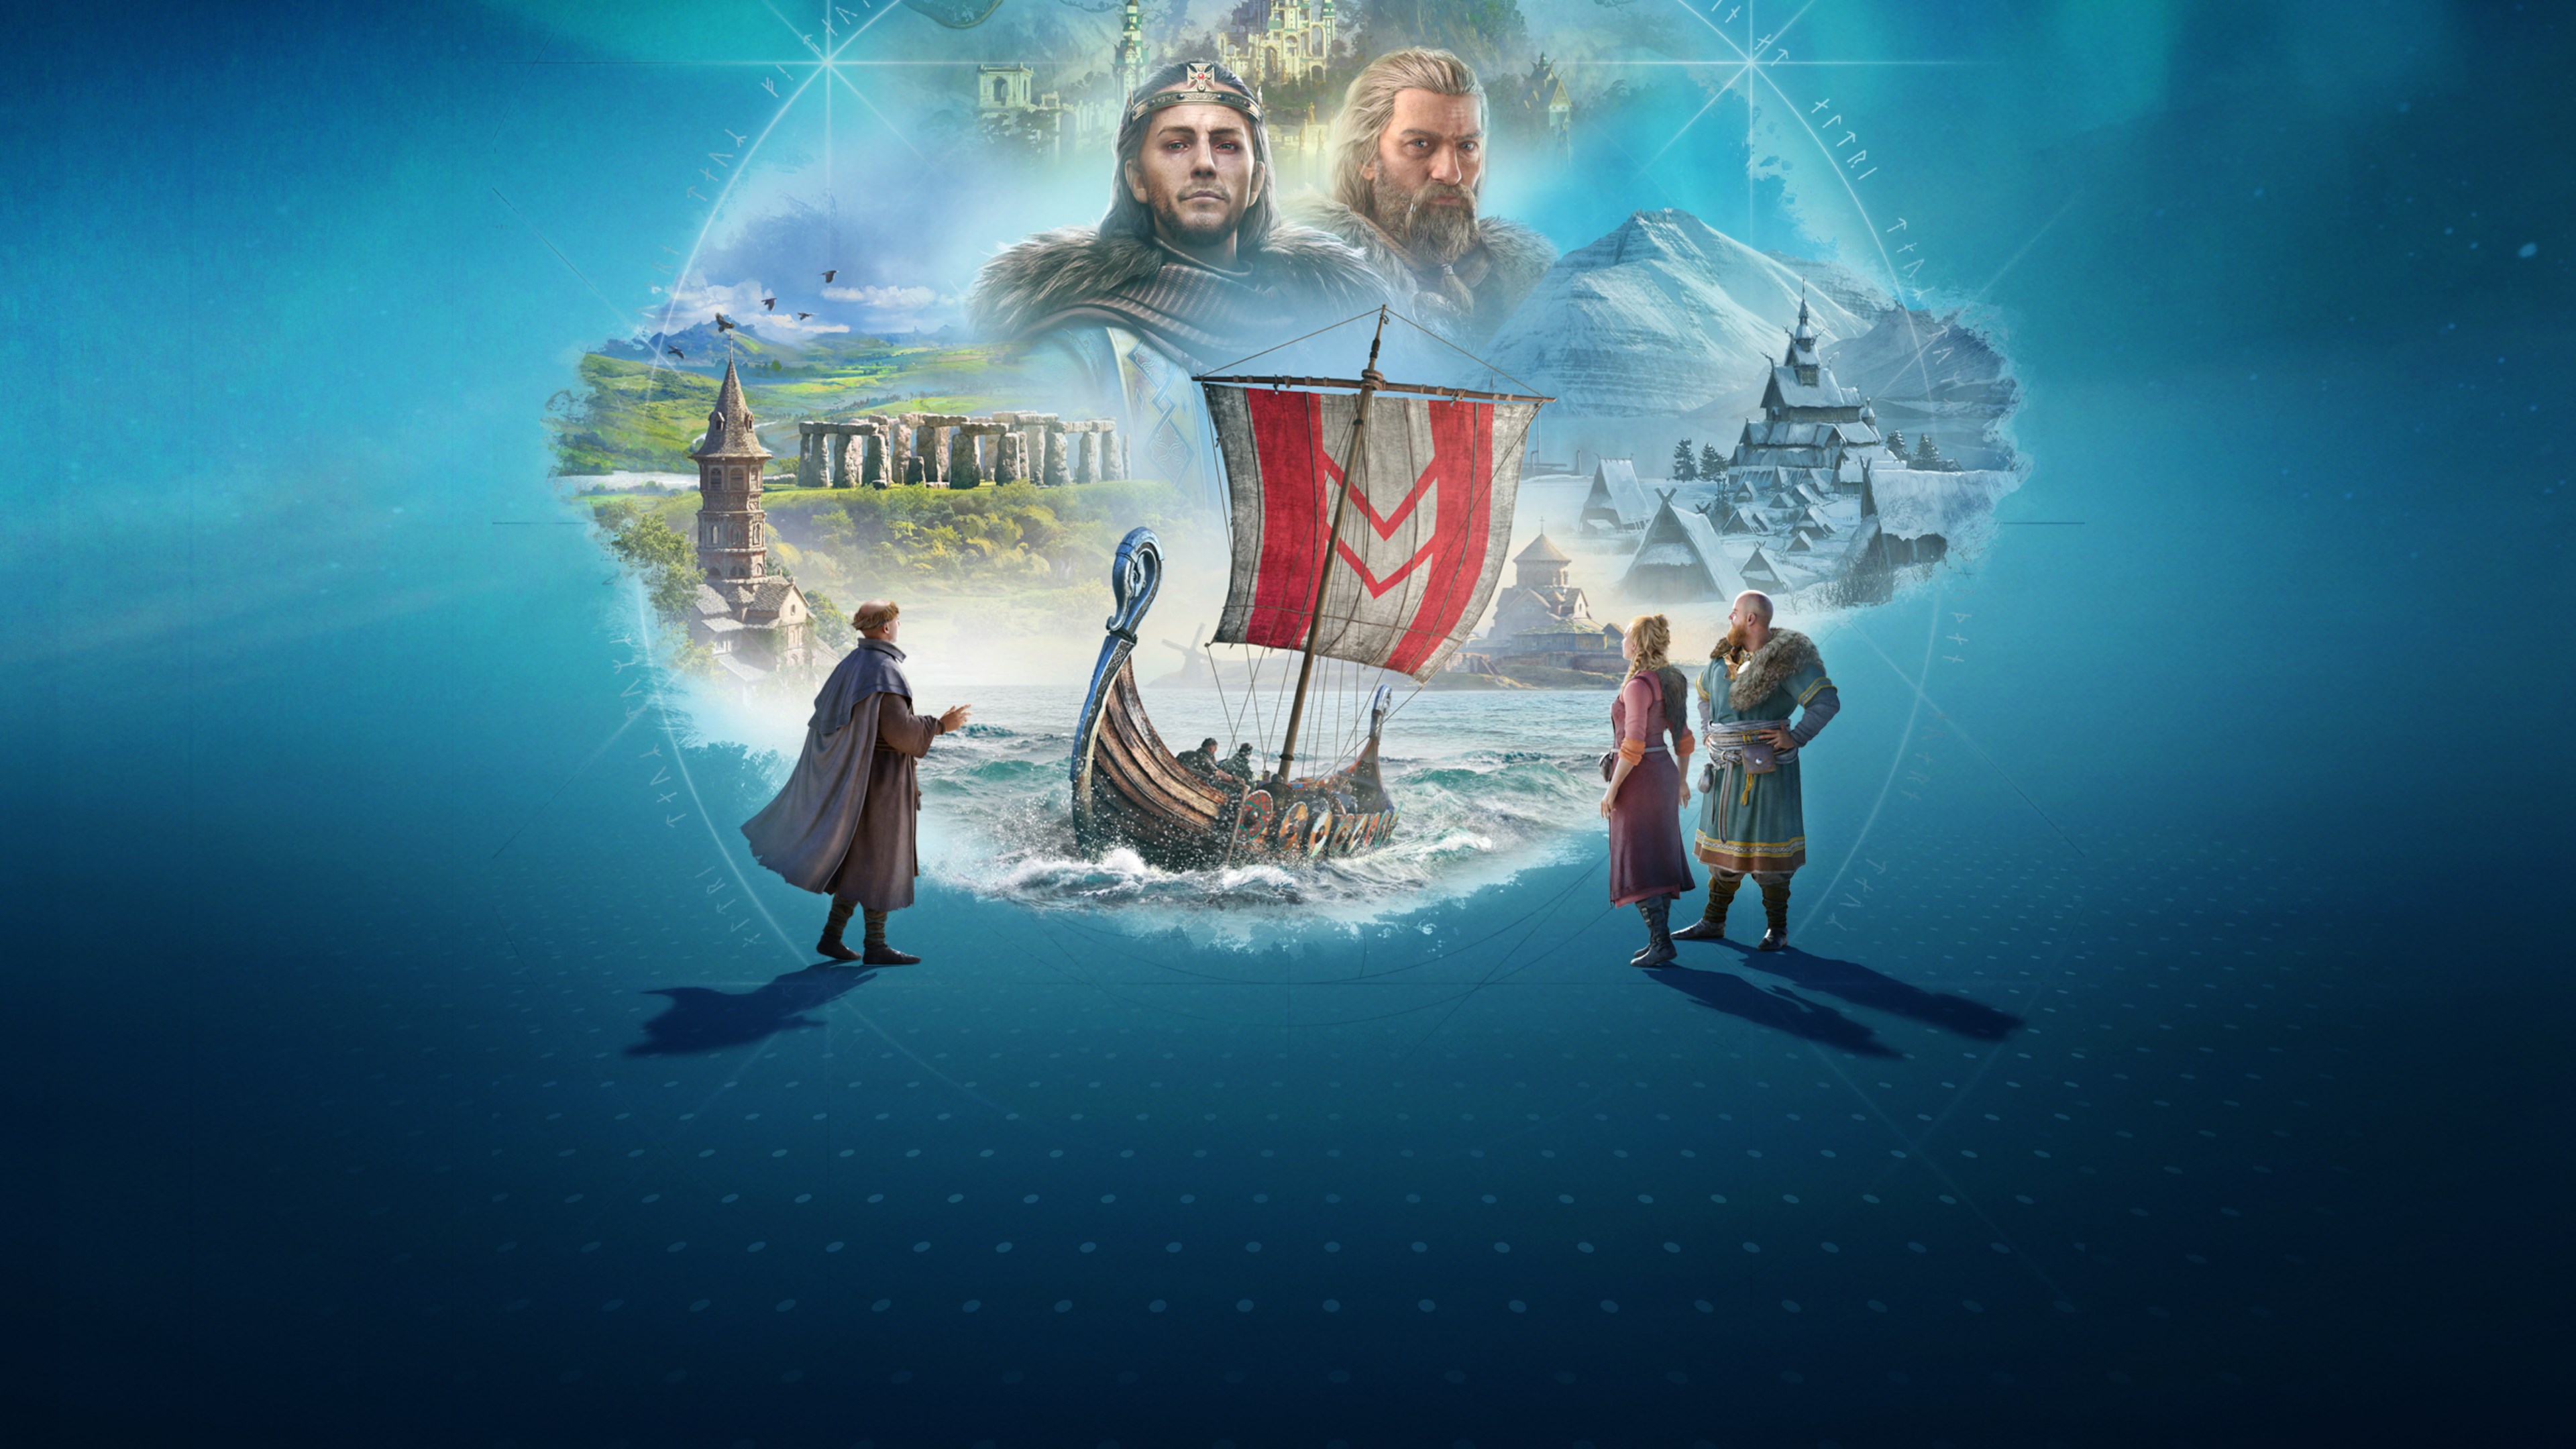 Assassin's Creed Valhalla Explores the Age of Vikings - Xbox Wire